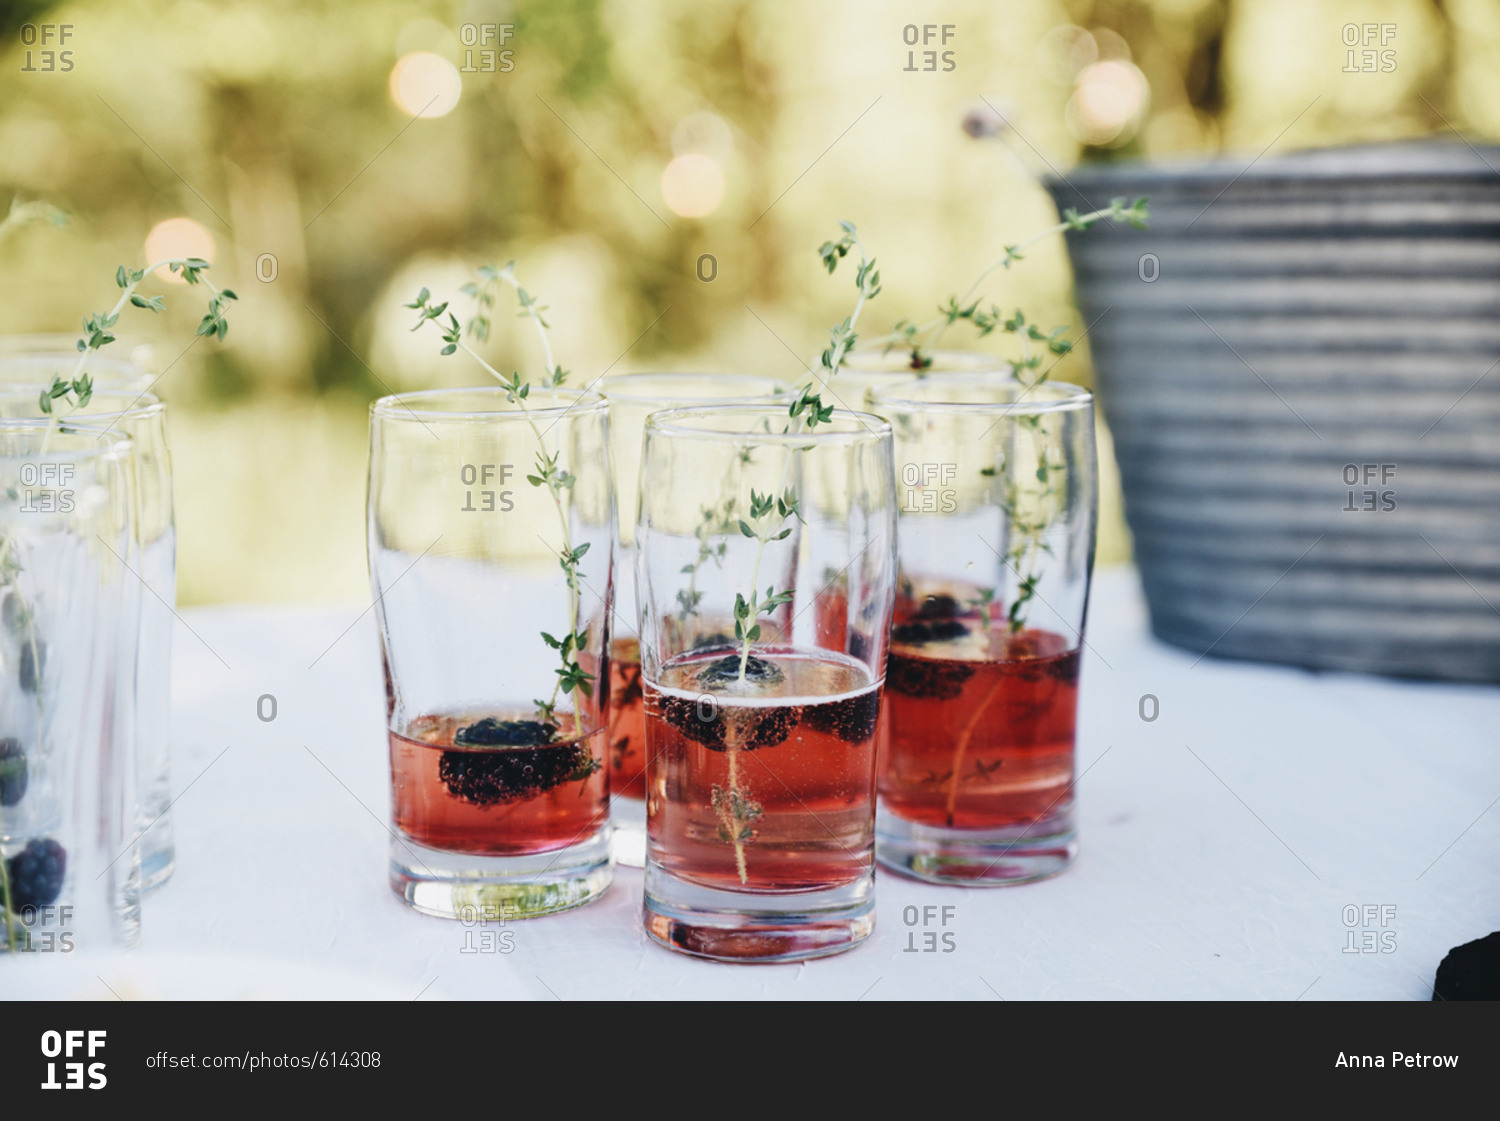 Drinks served with blackberries and garnished with herb sprig